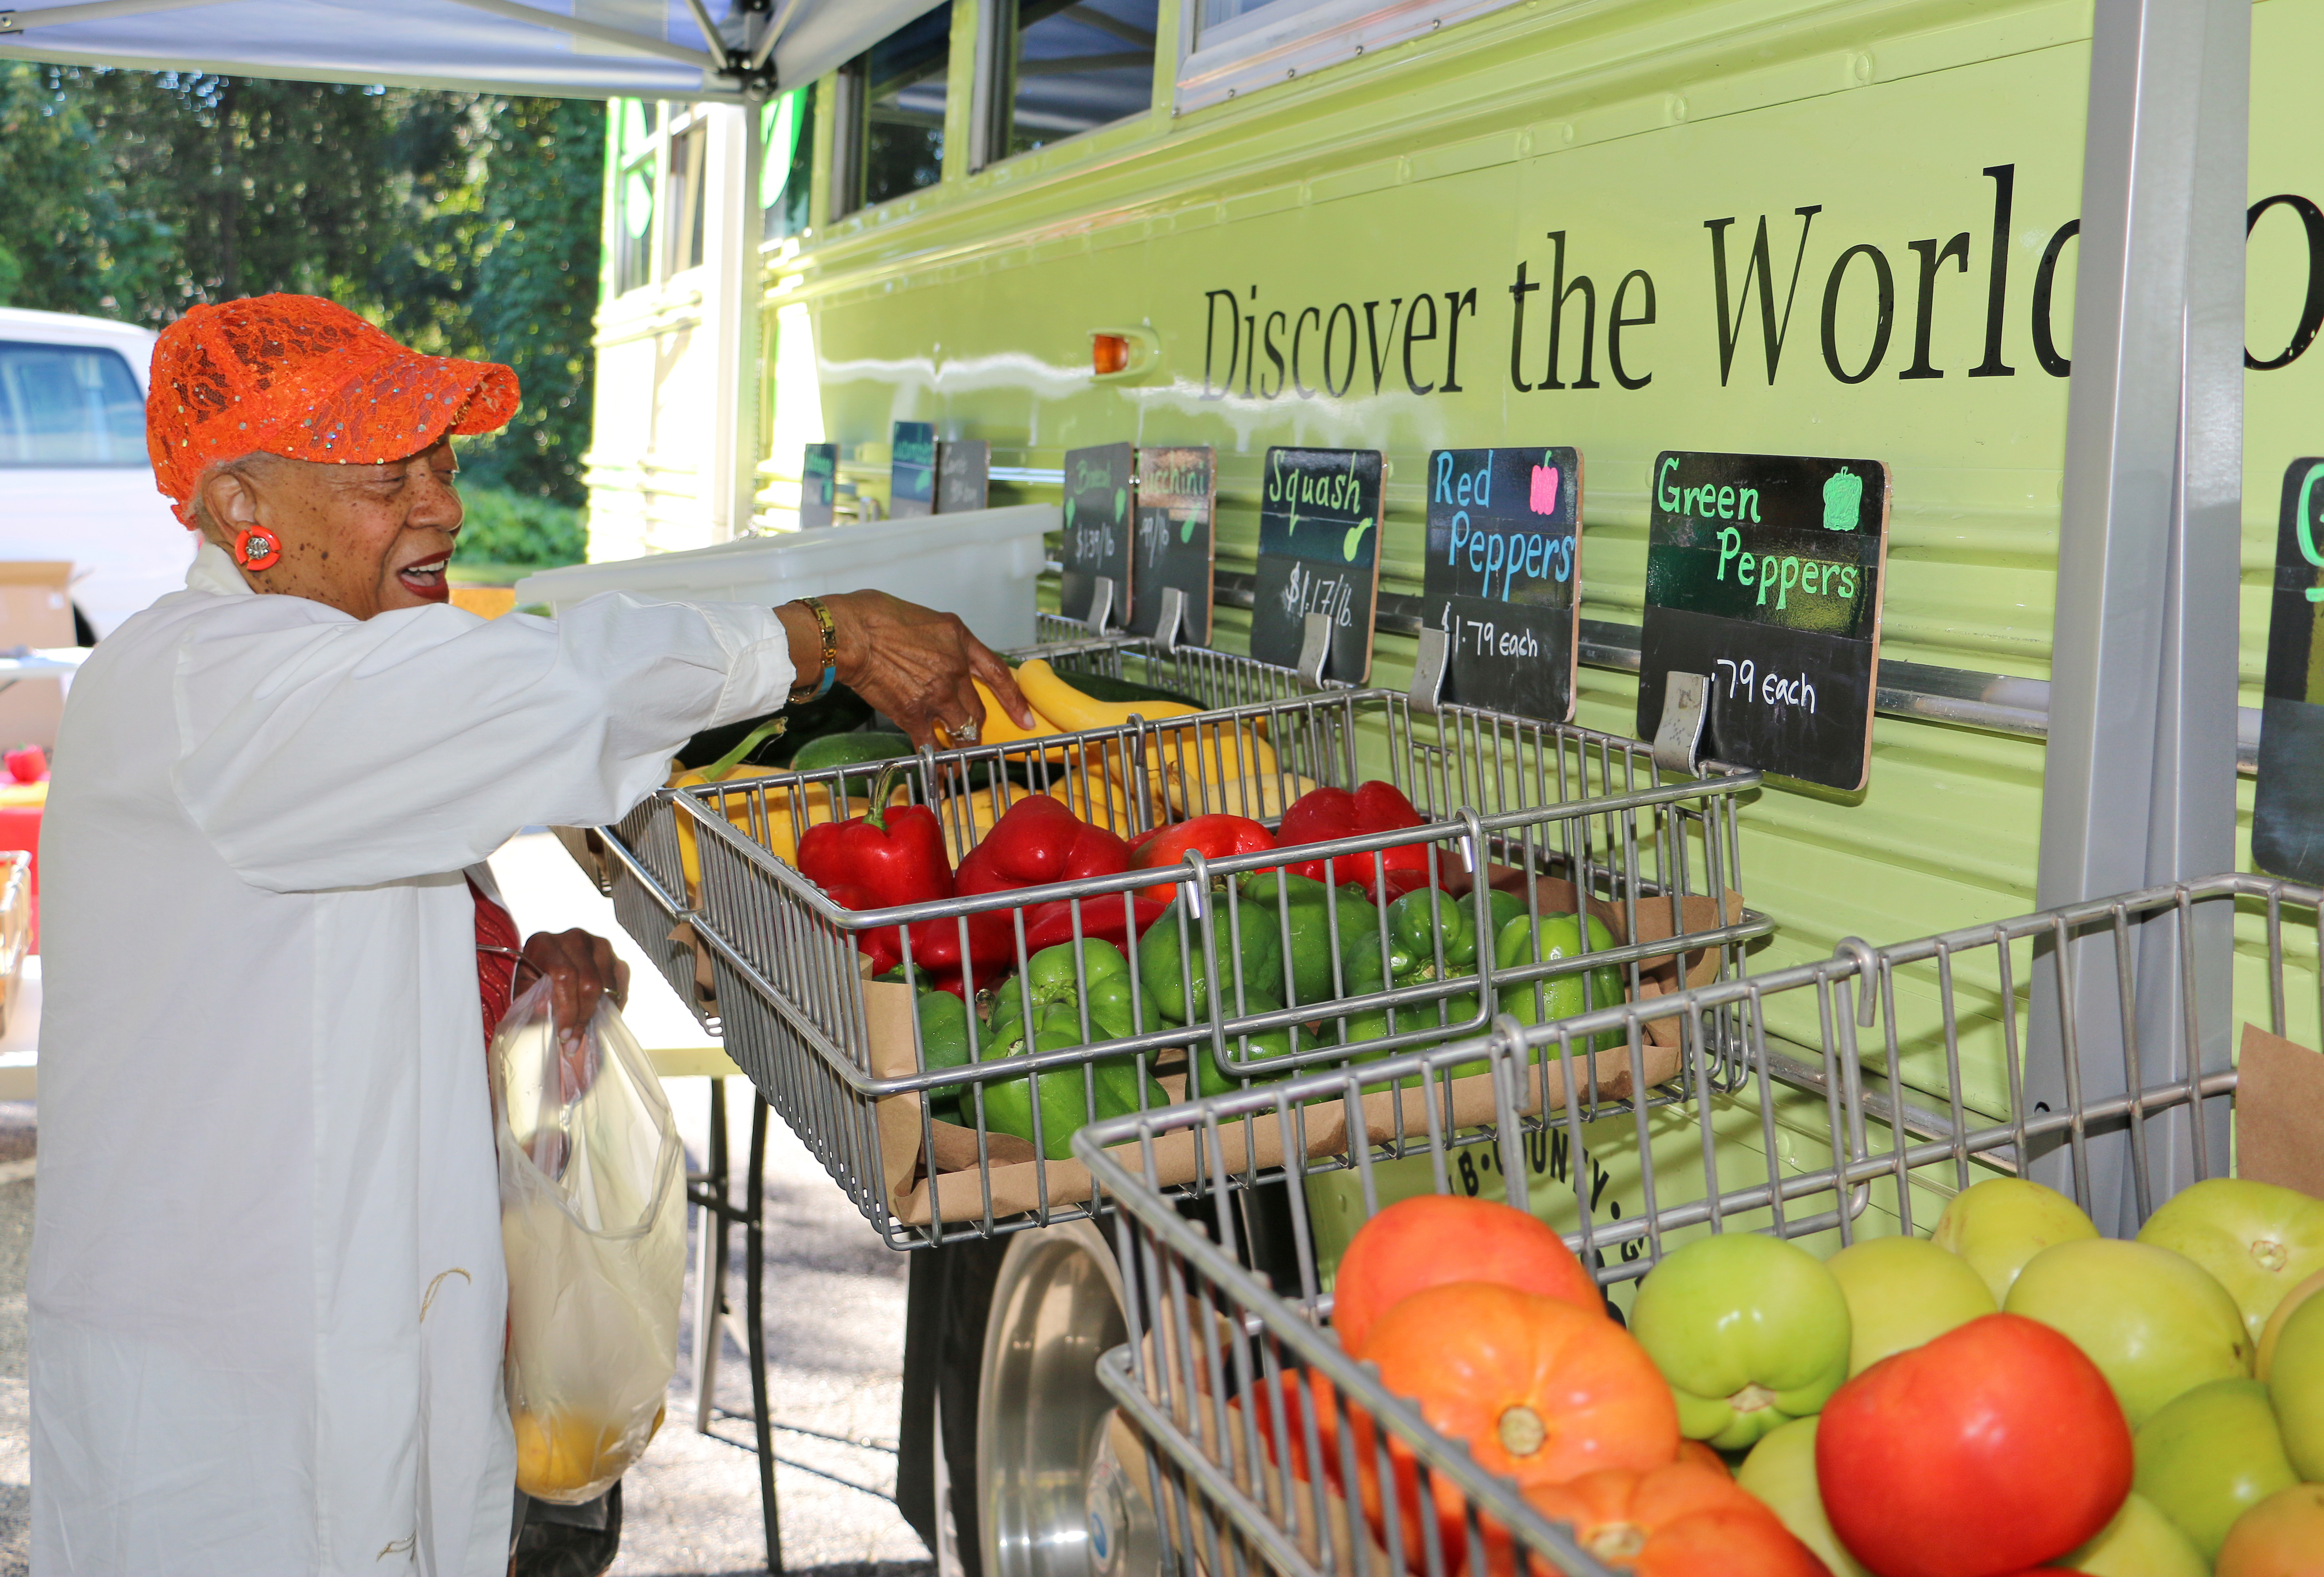 Connie Robinson browses the produce at the DeKalb County Mobile Market. The market, operated by UGA Extension in DeKalb County and the DeKalb County Board of Health, brings fresh produce to communities with limited access to fruits and vegetables.